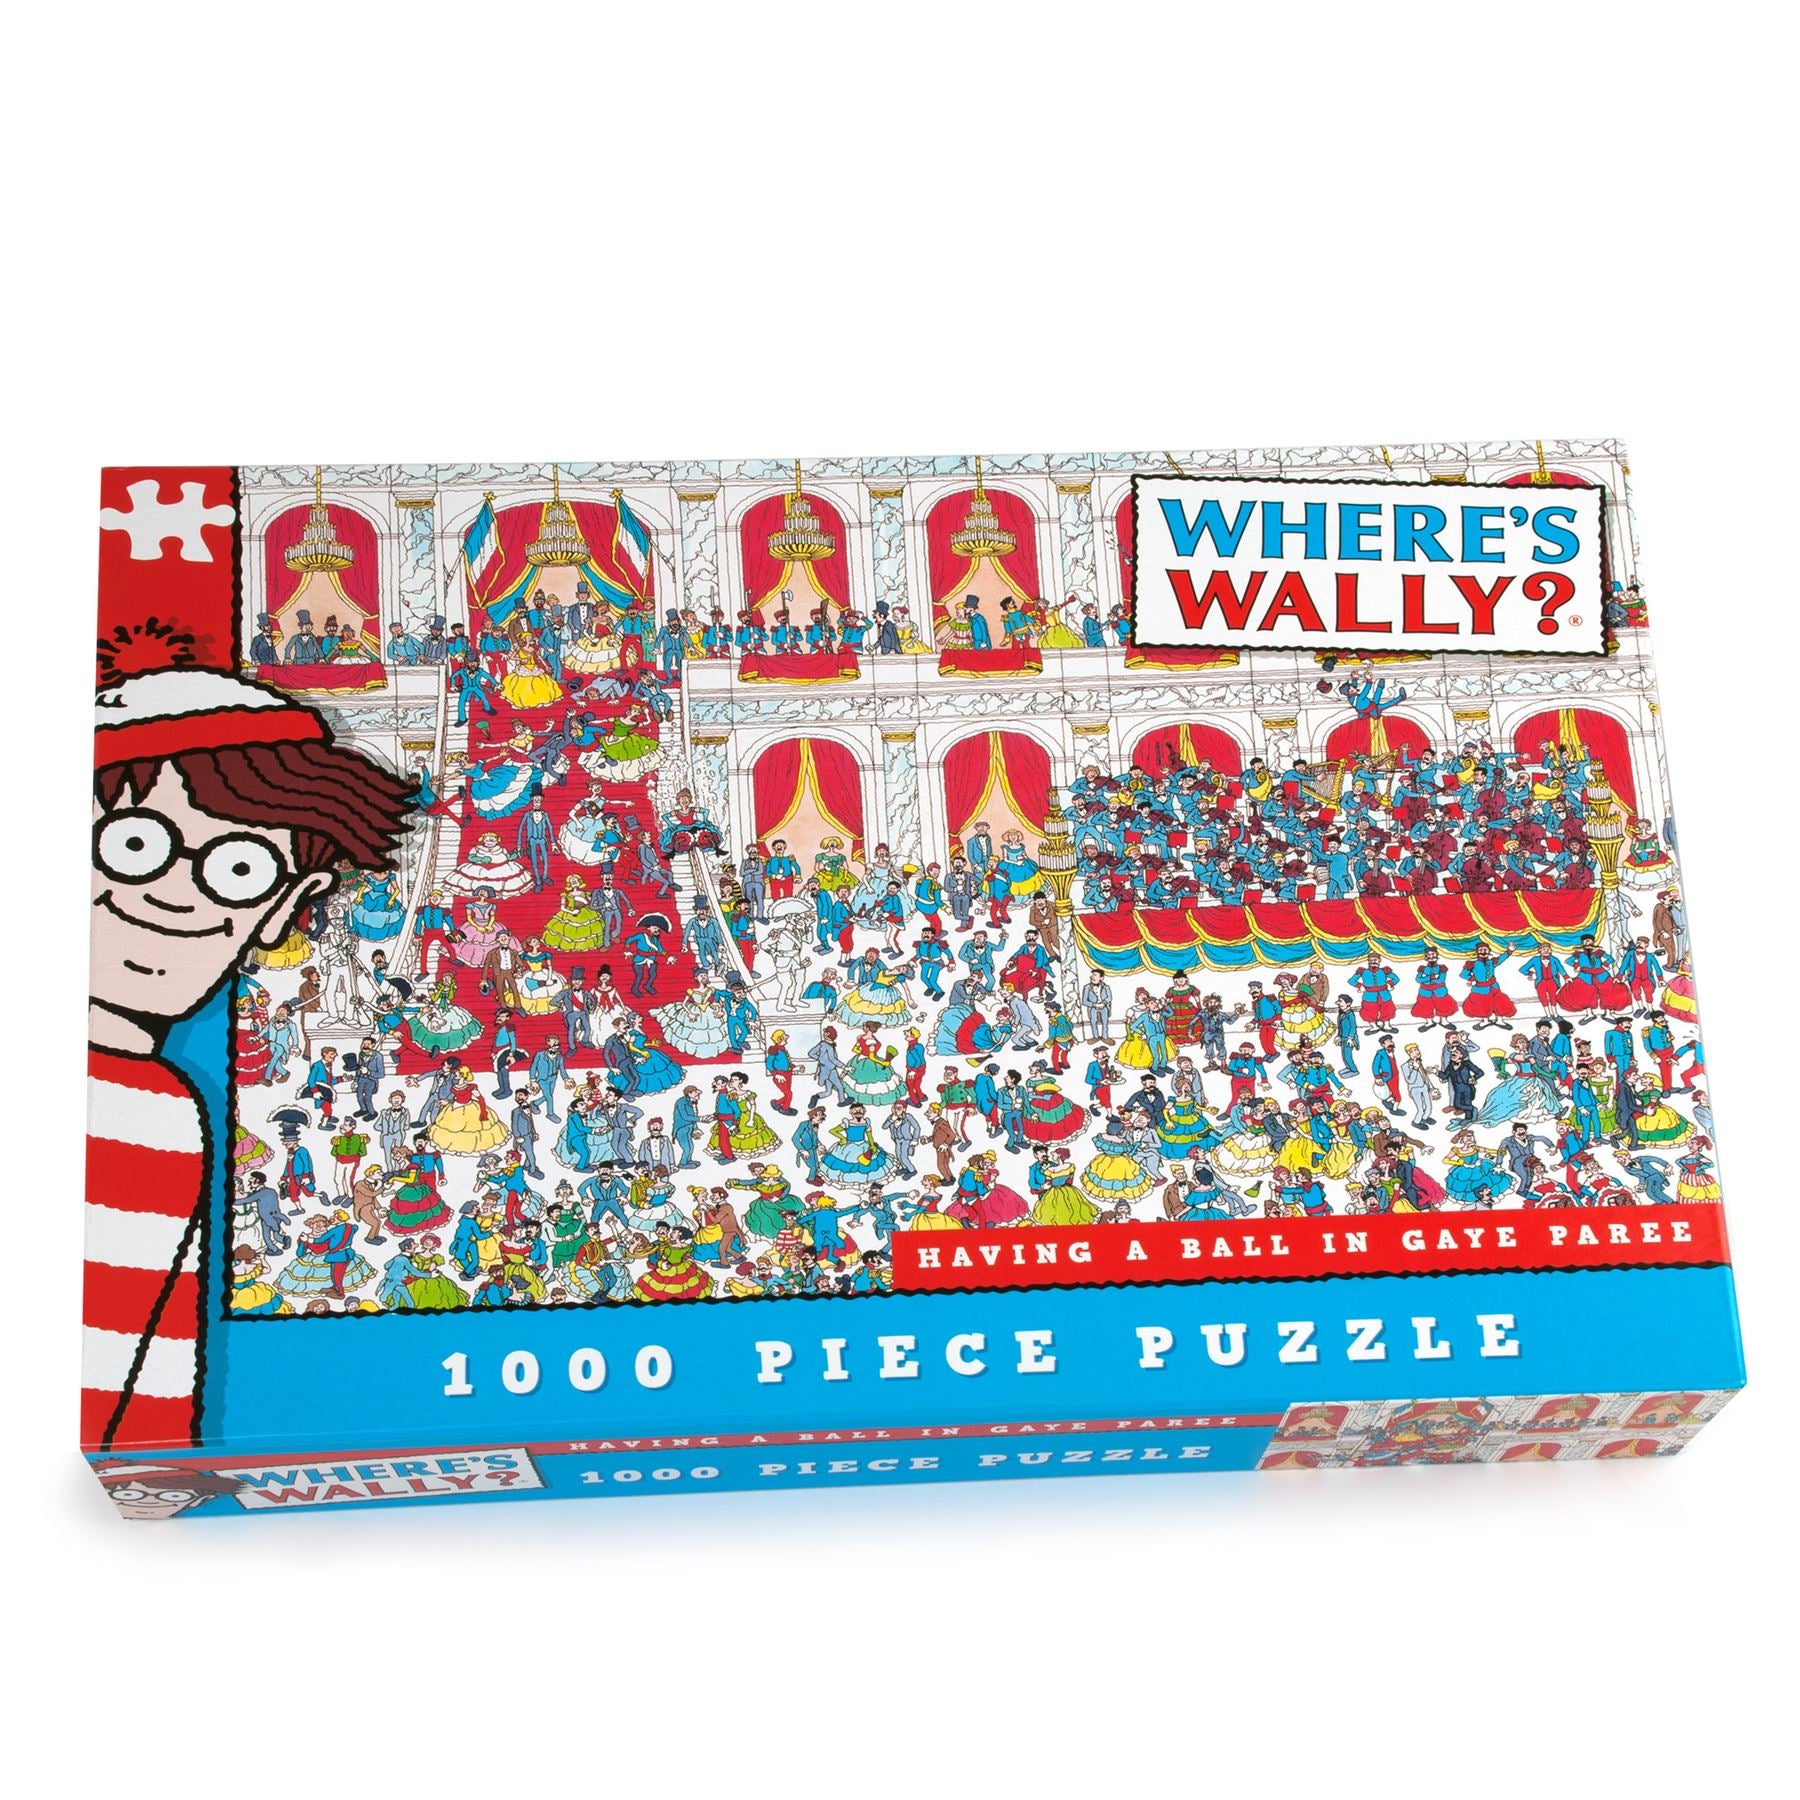 Where's Wally - Having A Ball In Gaye Paree 1000 Piece Jigsaw Puzzle